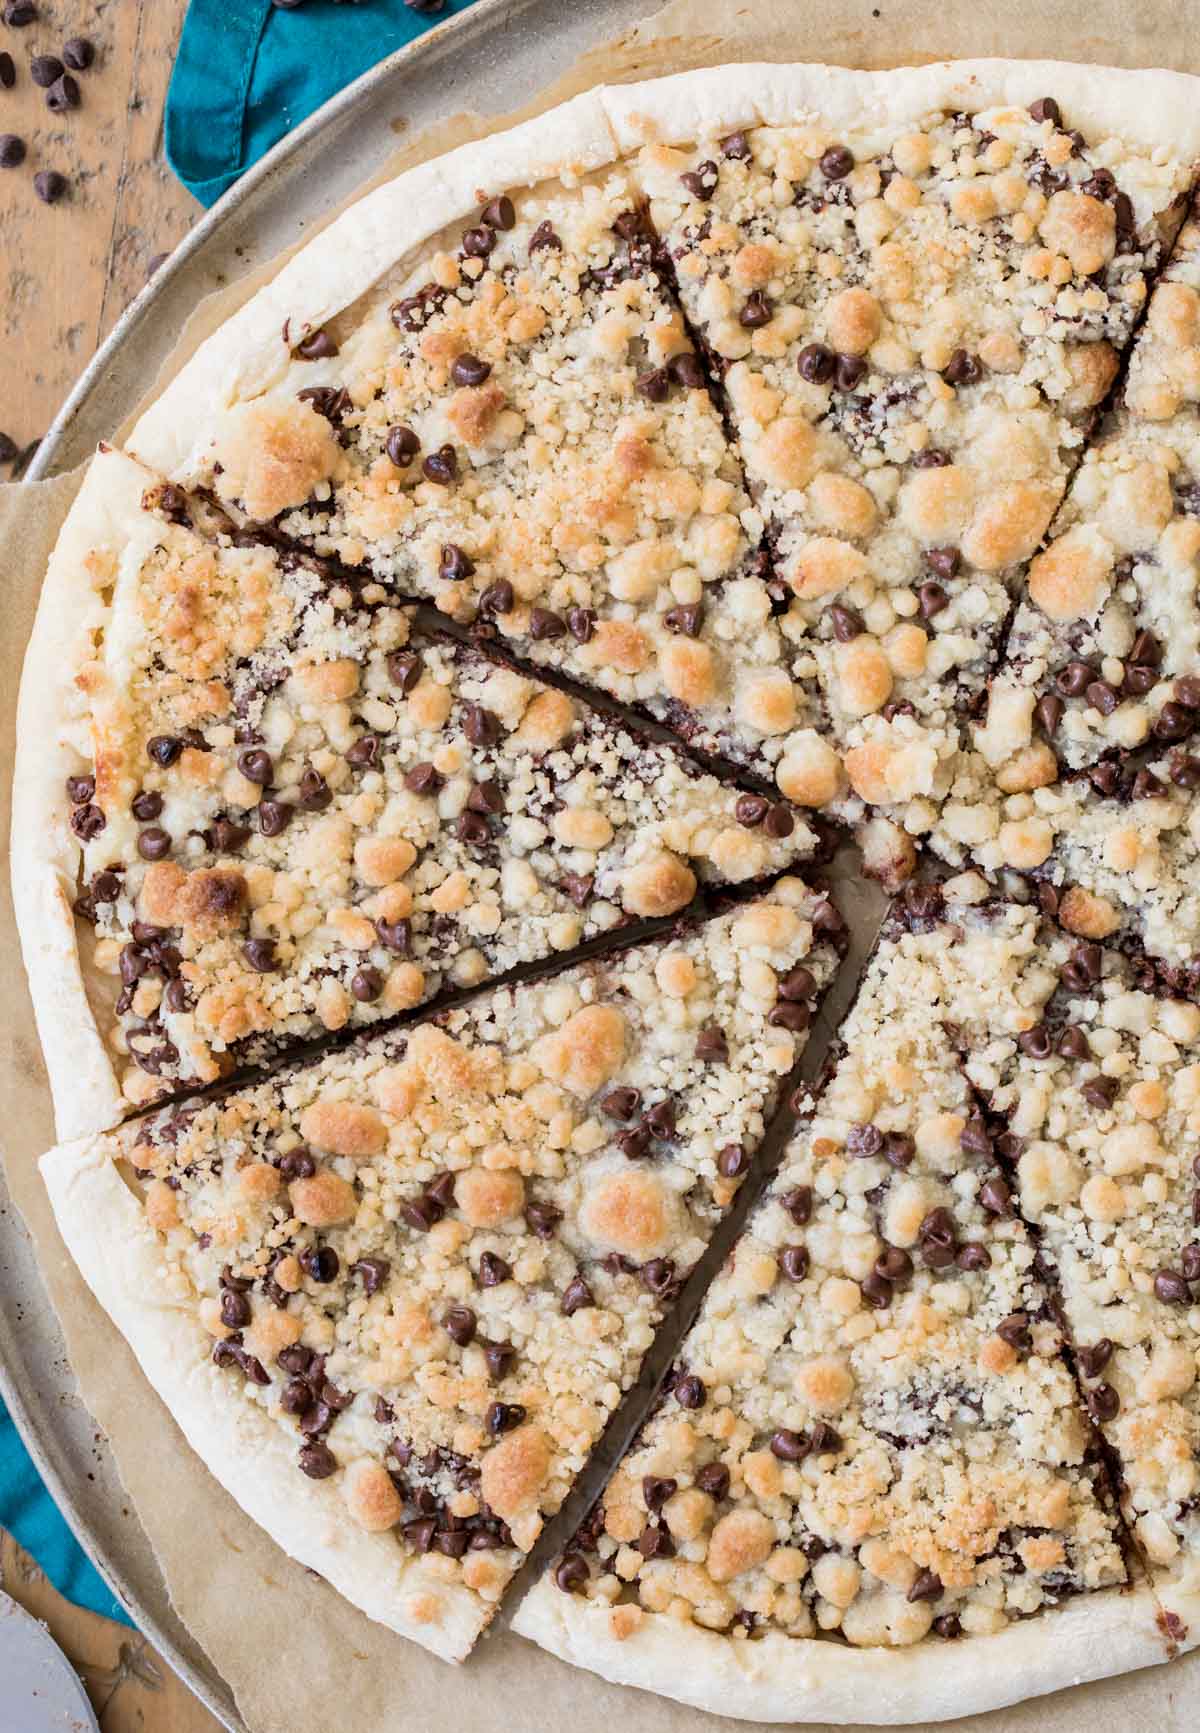 Overhead view of a chocolate chip dessert pizza that's been cut into slices.